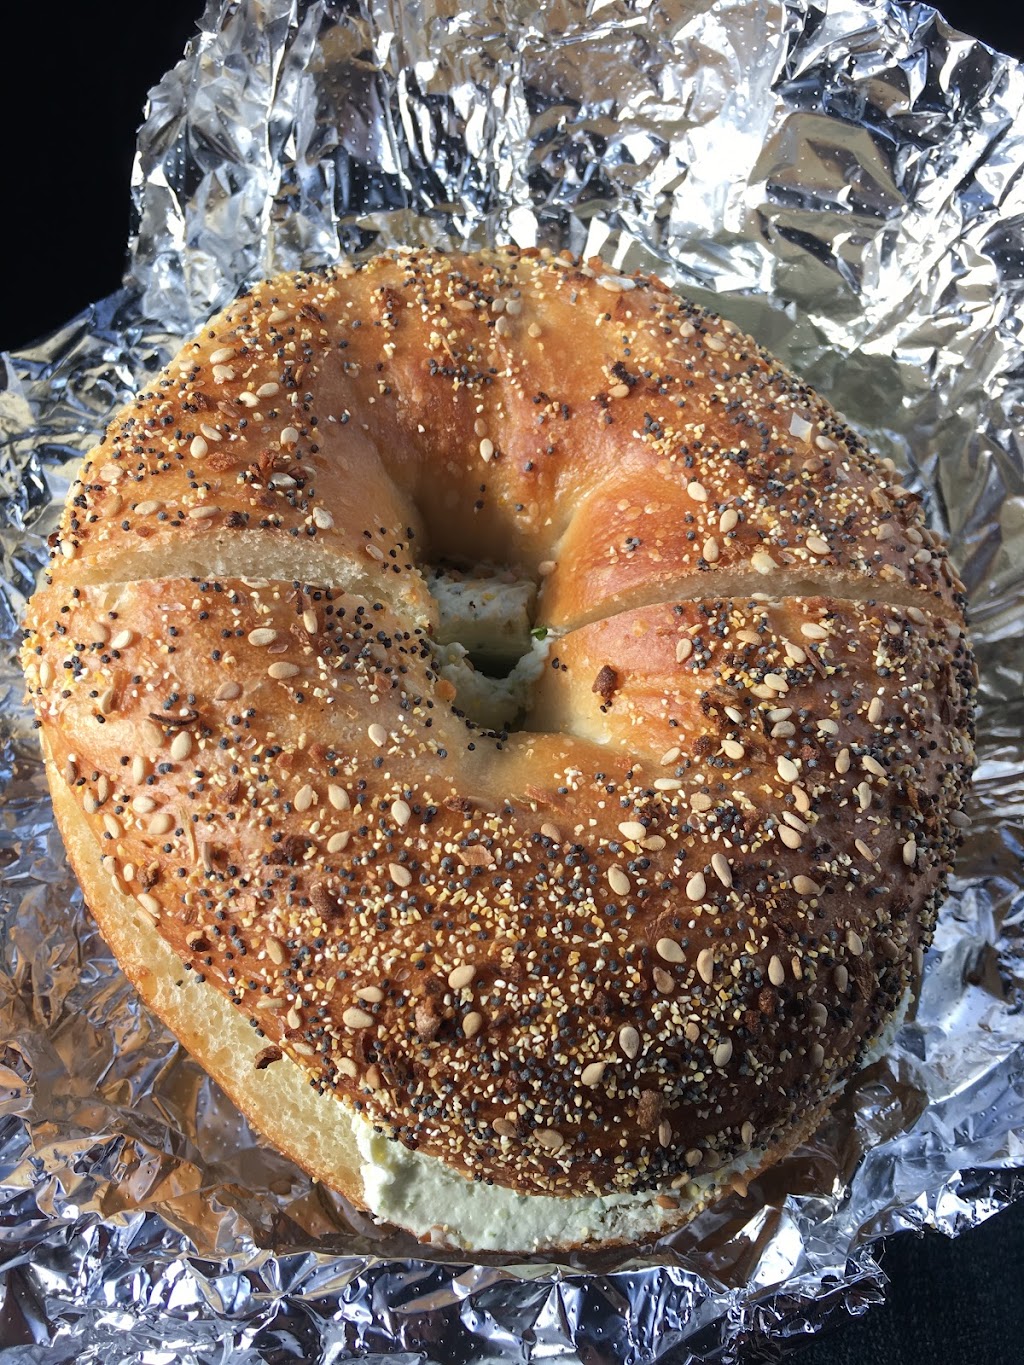 Bagelicious Bagels of Cheshire | 945 S Main St, Cheshire, CT 06410 | Phone: (203) 250-9339